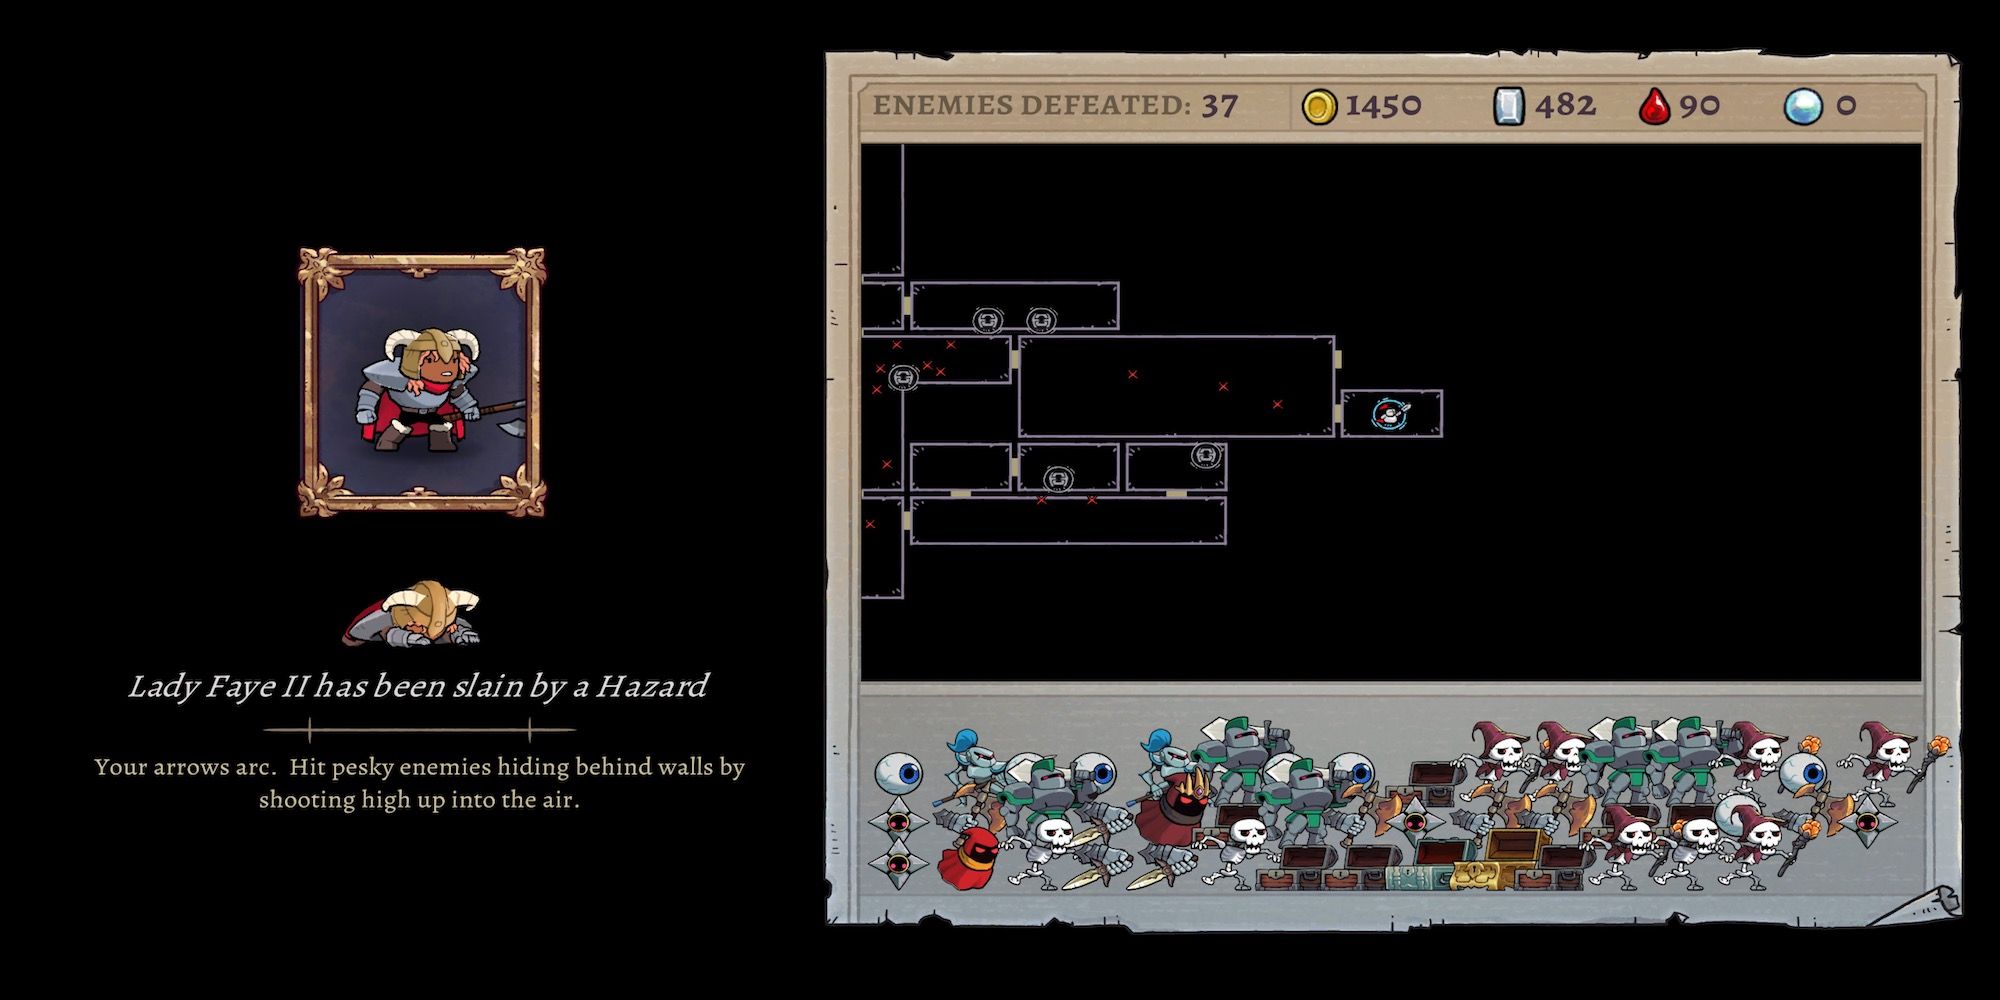 The death screen in Rogue Legacy 2